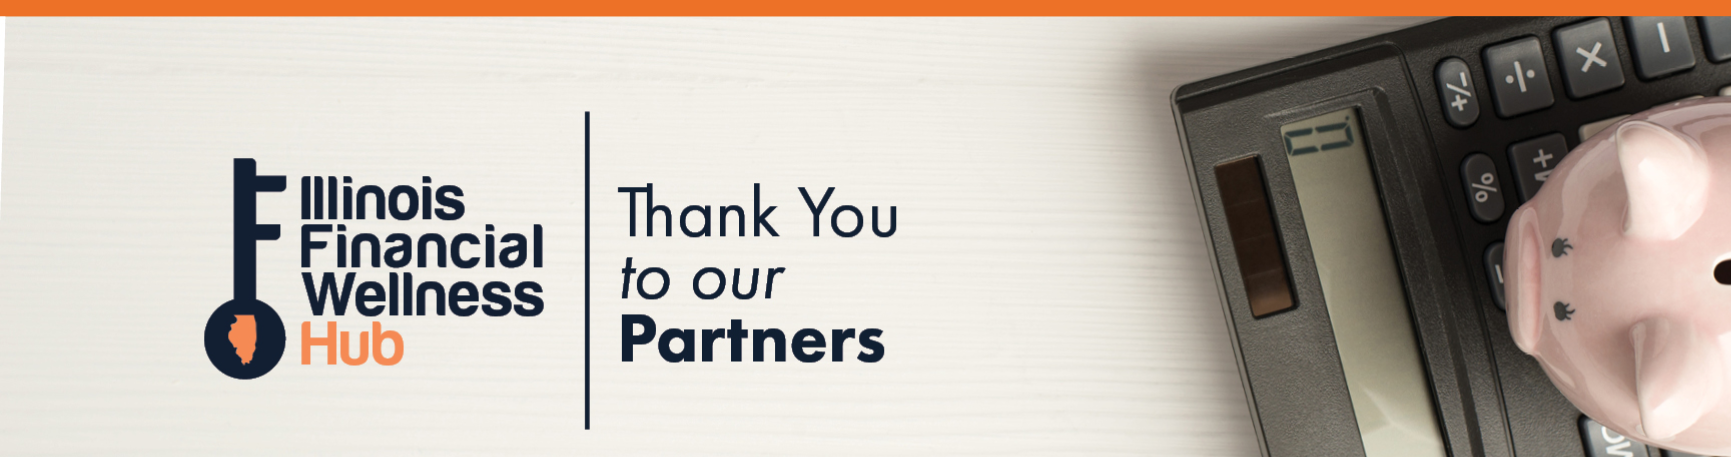 Thank You to our Partners